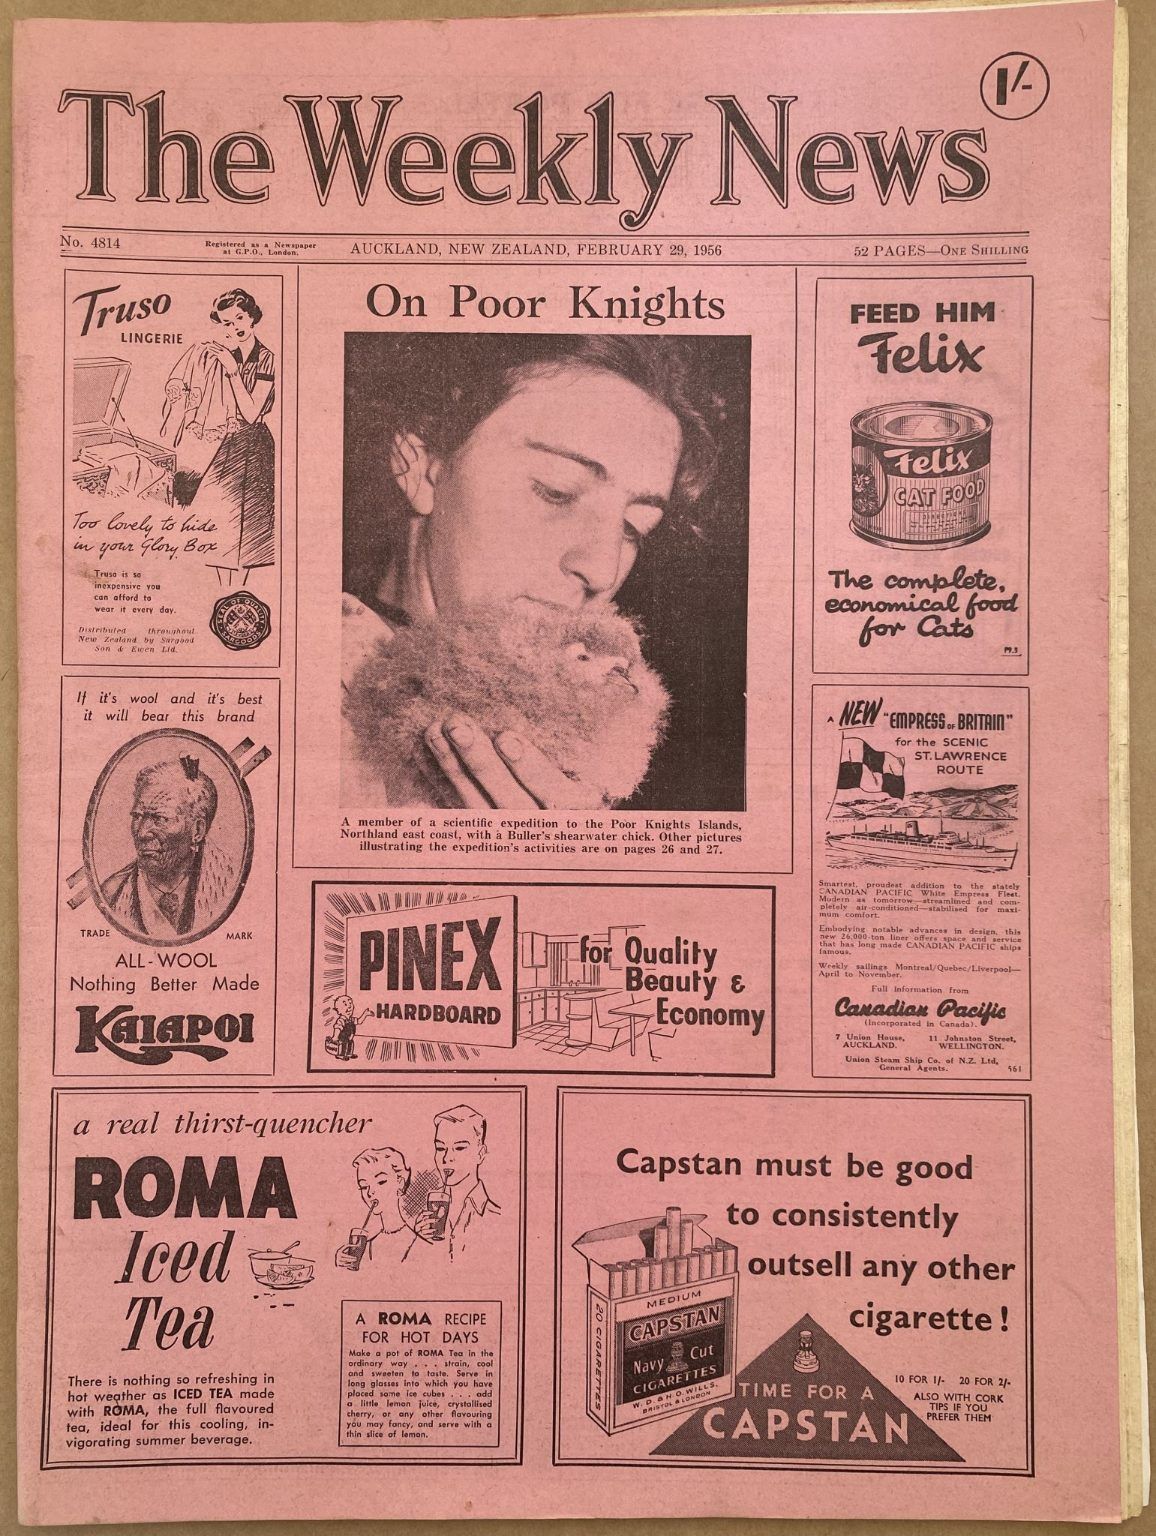 OLD NEWSPAPER: The Weekly News - No. 4814, 29 February 1956